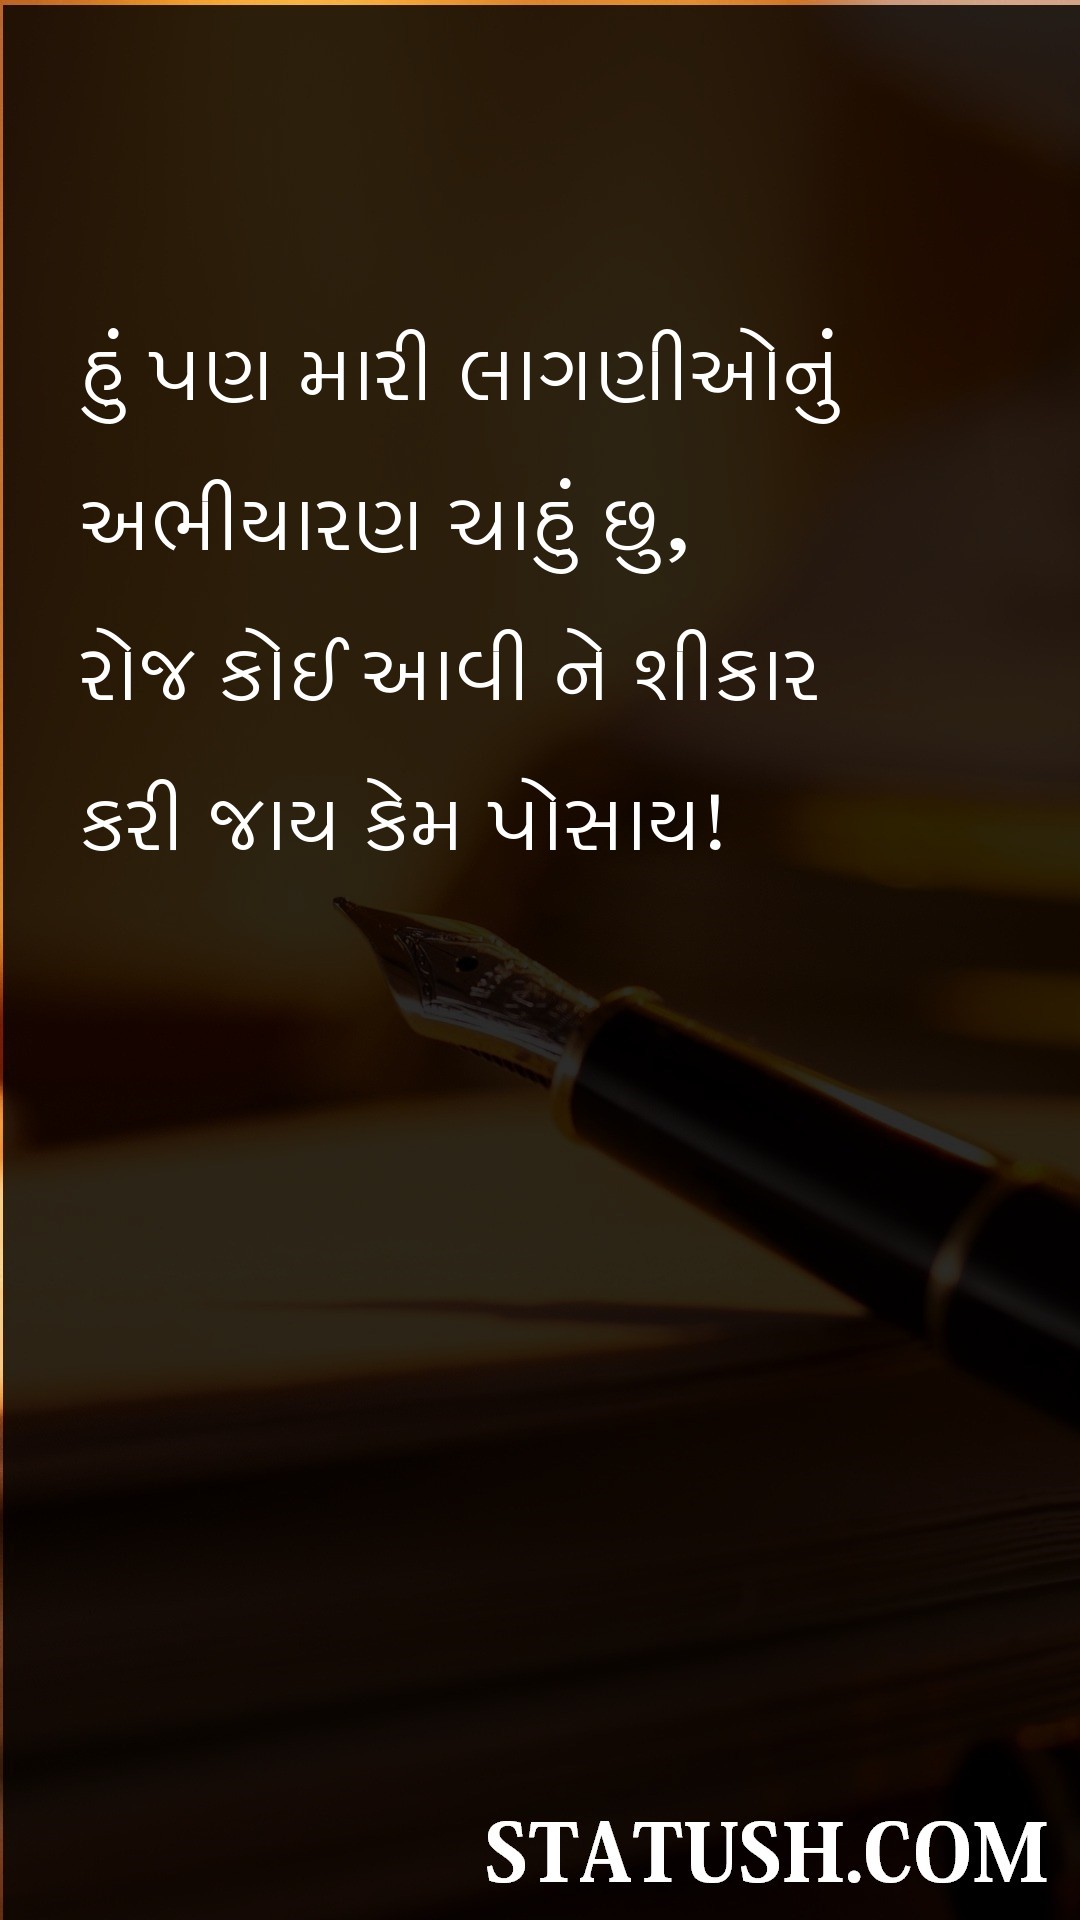 I also reserve my emotions Gujarati Quotes at statush.com